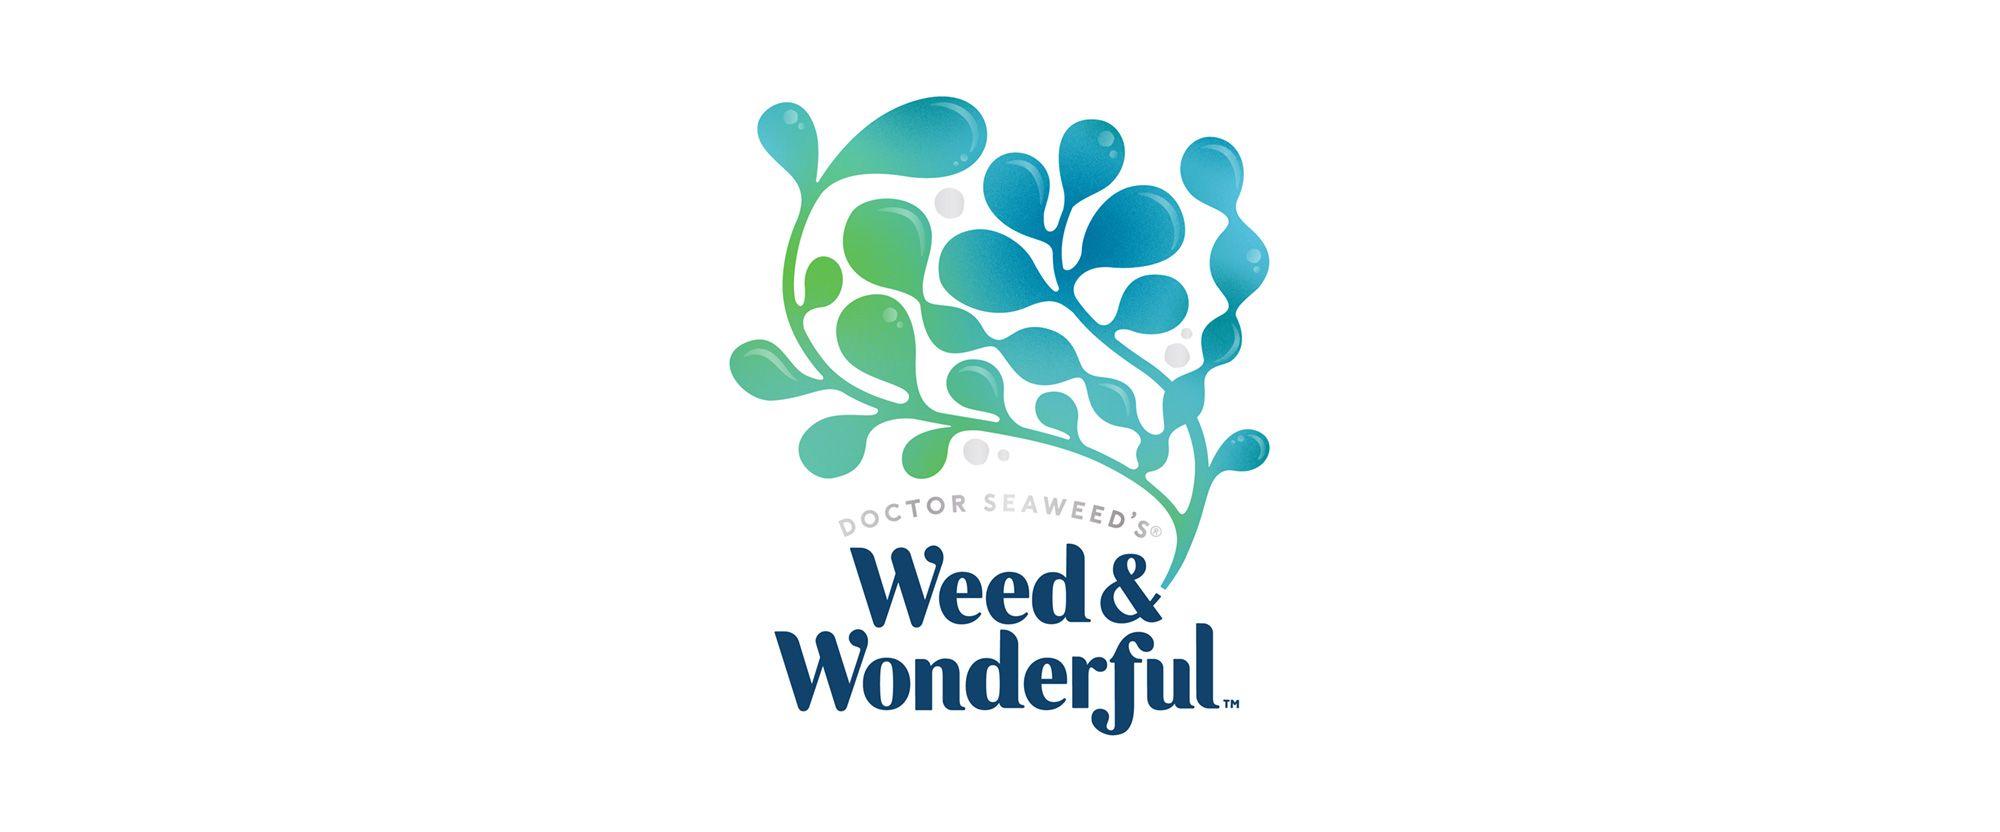 Wonderful Logo - Brand New: New Logo and Packaging for Weed & Wonderful by Family ...